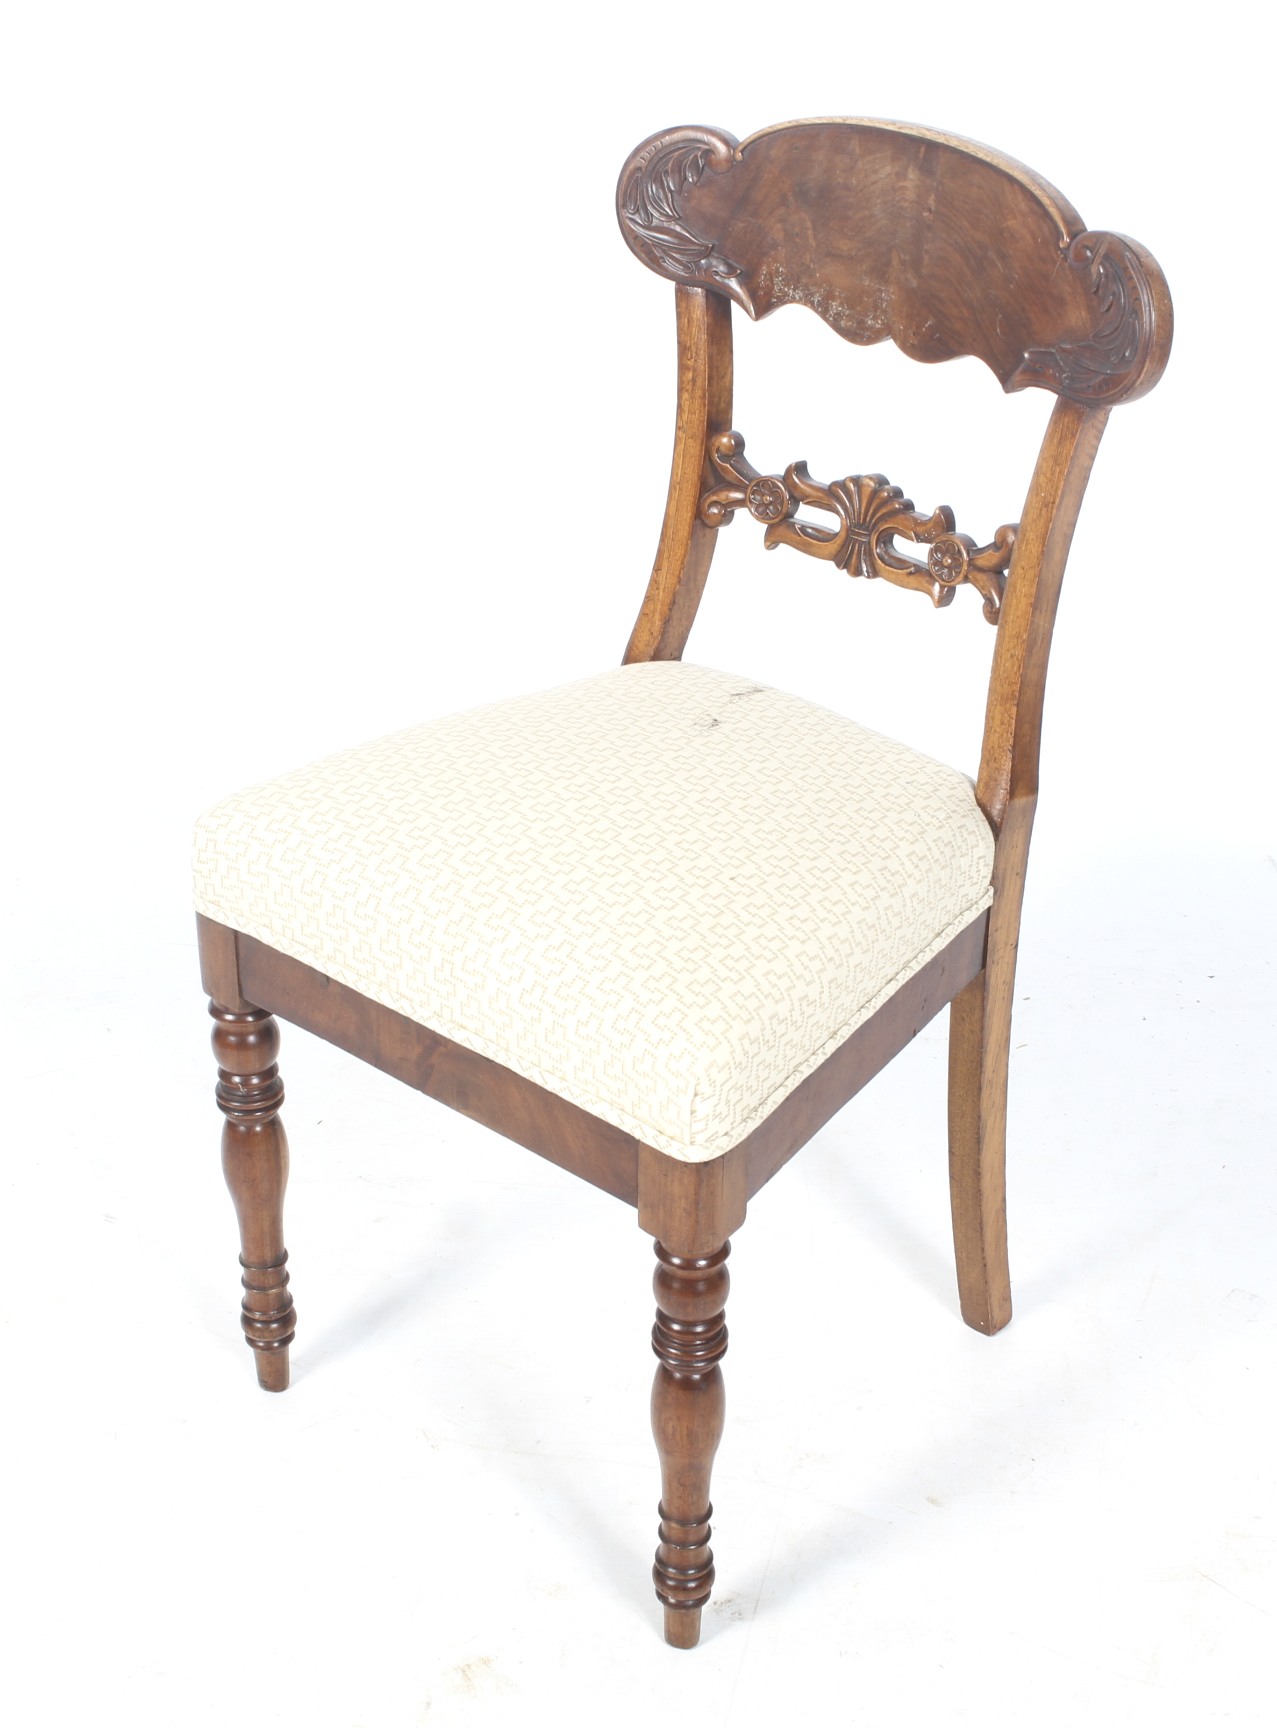 A 19th century carved bar-back mahogany chair.